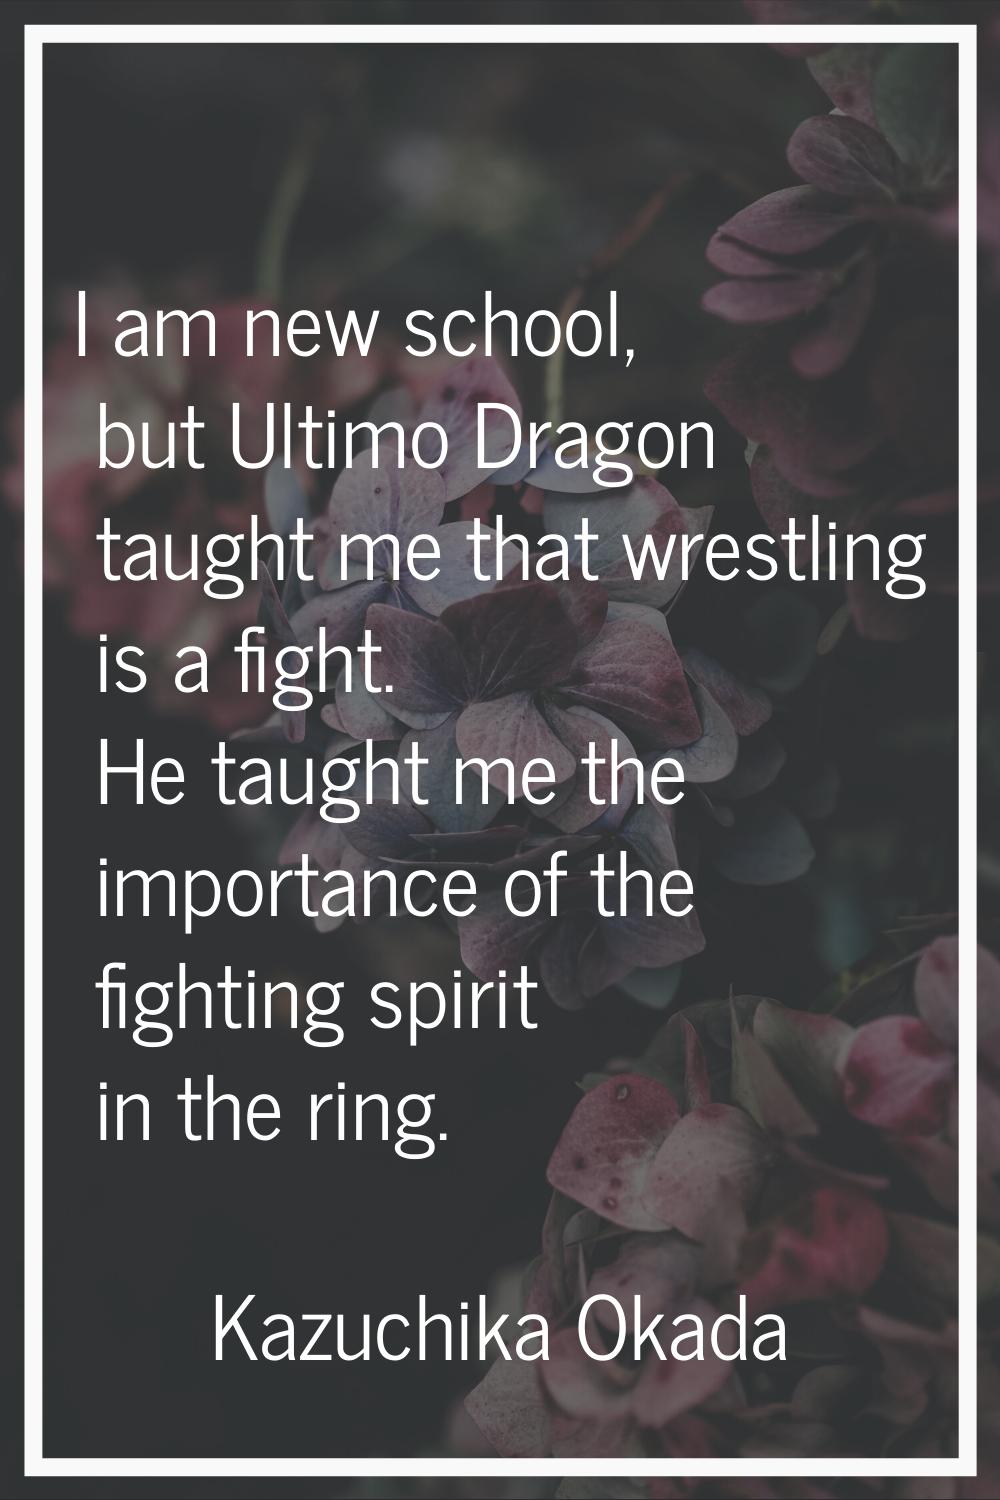 I am new school, but Ultimo Dragon taught me that wrestling is a fight. He taught me the importance